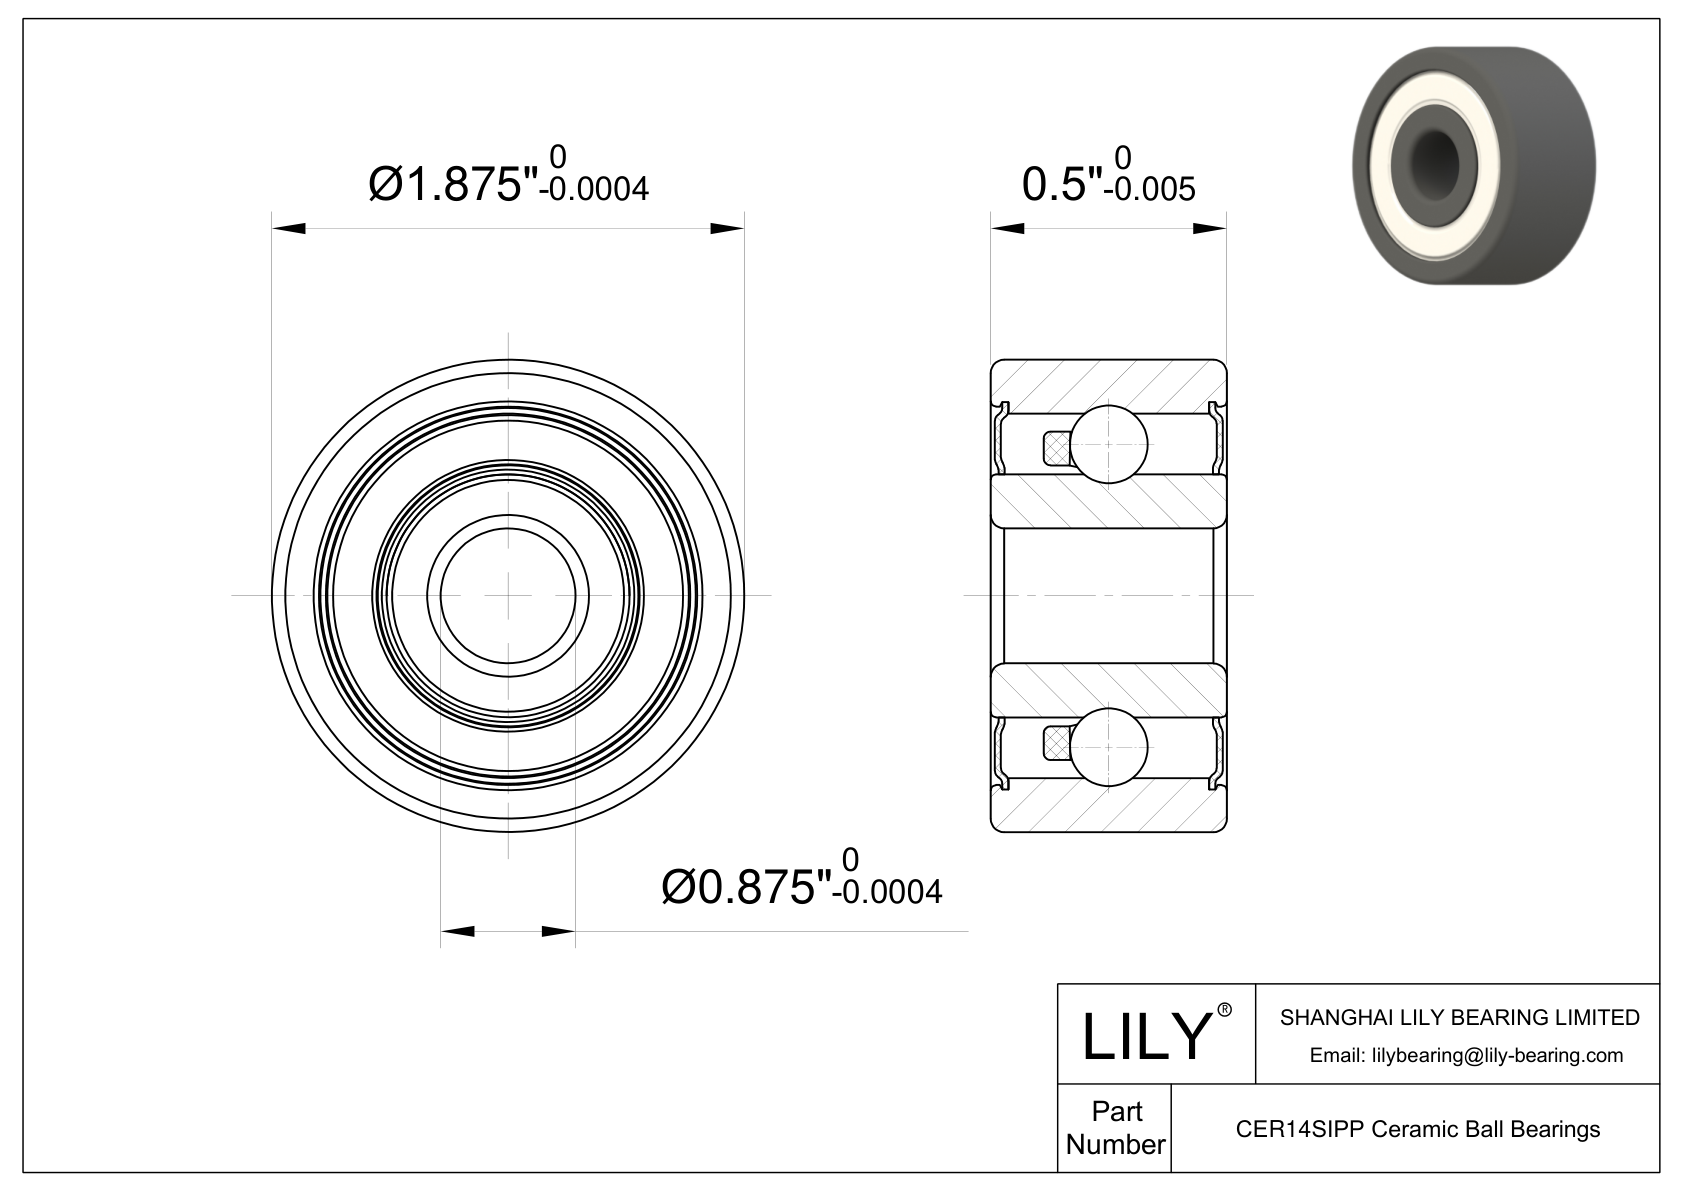 CESI R14 2RS Inch Size Silicon Nitride Ceramic Bearings cad drawing